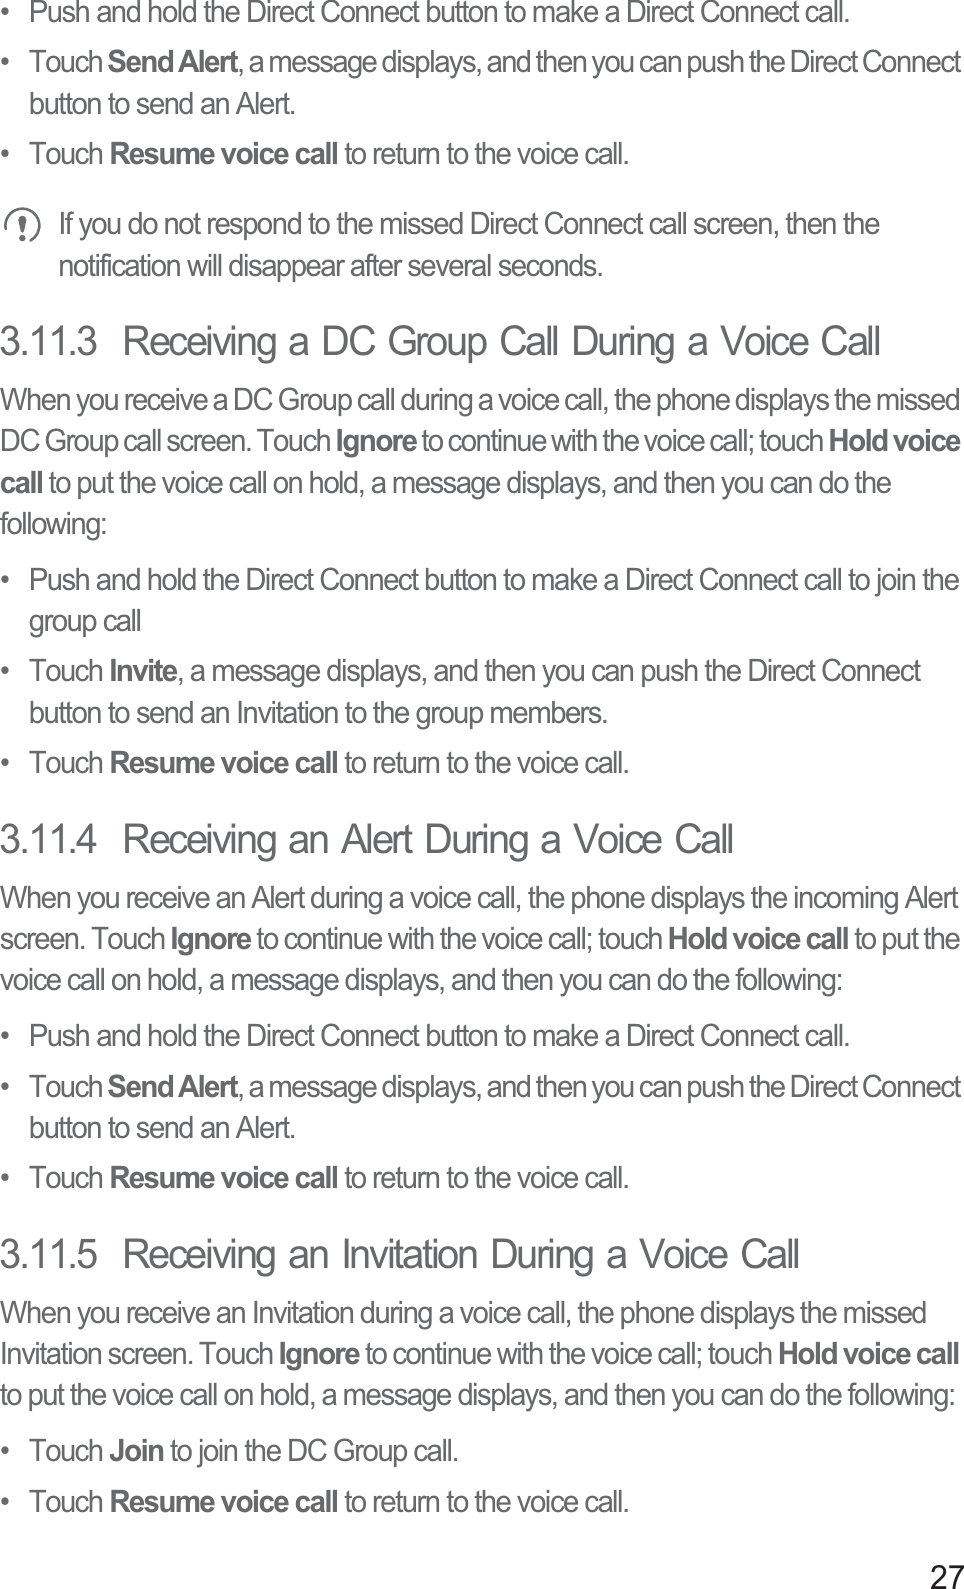 27•  Push and hold the Direct Connect button to make a Direct Connect call.• Touch Send Alert, a message displays, and then you can push the Direct Connect button to send an Alert.• Touch Resume voice call to return to the voice call.If you do not respond to the missed Direct Connect call screen, then the notification will disappear after several seconds.3.11.3  Receiving a DC Group Call During a Voice CallWhen you receive a DC Group call during a voice call, the phone displays the missed DC Group call screen. Touch Ignore to continue with the voice call; touch Hold voice call to put the voice call on hold, a message displays, and then you can do the following:•  Push and hold the Direct Connect button to make a Direct Connect call to join the group call• Touch Invite, a message displays, and then you can push the Direct Connect button to send an Invitation to the group members.• Touch Resume voice call to return to the voice call.3.11.4  Receiving an Alert During a Voice CallWhen you receive an Alert during a voice call, the phone displays the incoming Alert screen. Touch Ignore to continue with the voice call; touch Hold voice call to put the voice call on hold, a message displays, and then you can do the following:•  Push and hold the Direct Connect button to make a Direct Connect call.• Touch Send Alert, a message displays, and then you can push the Direct Connect button to send an Alert.• Touch Resume voice call to return to the voice call.3.11.5  Receiving an Invitation During a Voice CallWhen you receive an Invitation during a voice call, the phone displays the missed Invitation screen. Touch Ignore to continue with the voice call; touch Hold voice callto put the voice call on hold, a message displays, and then you can do the following:• Touch Join to join the DC Group call.• Touch Resume voice call to return to the voice call.